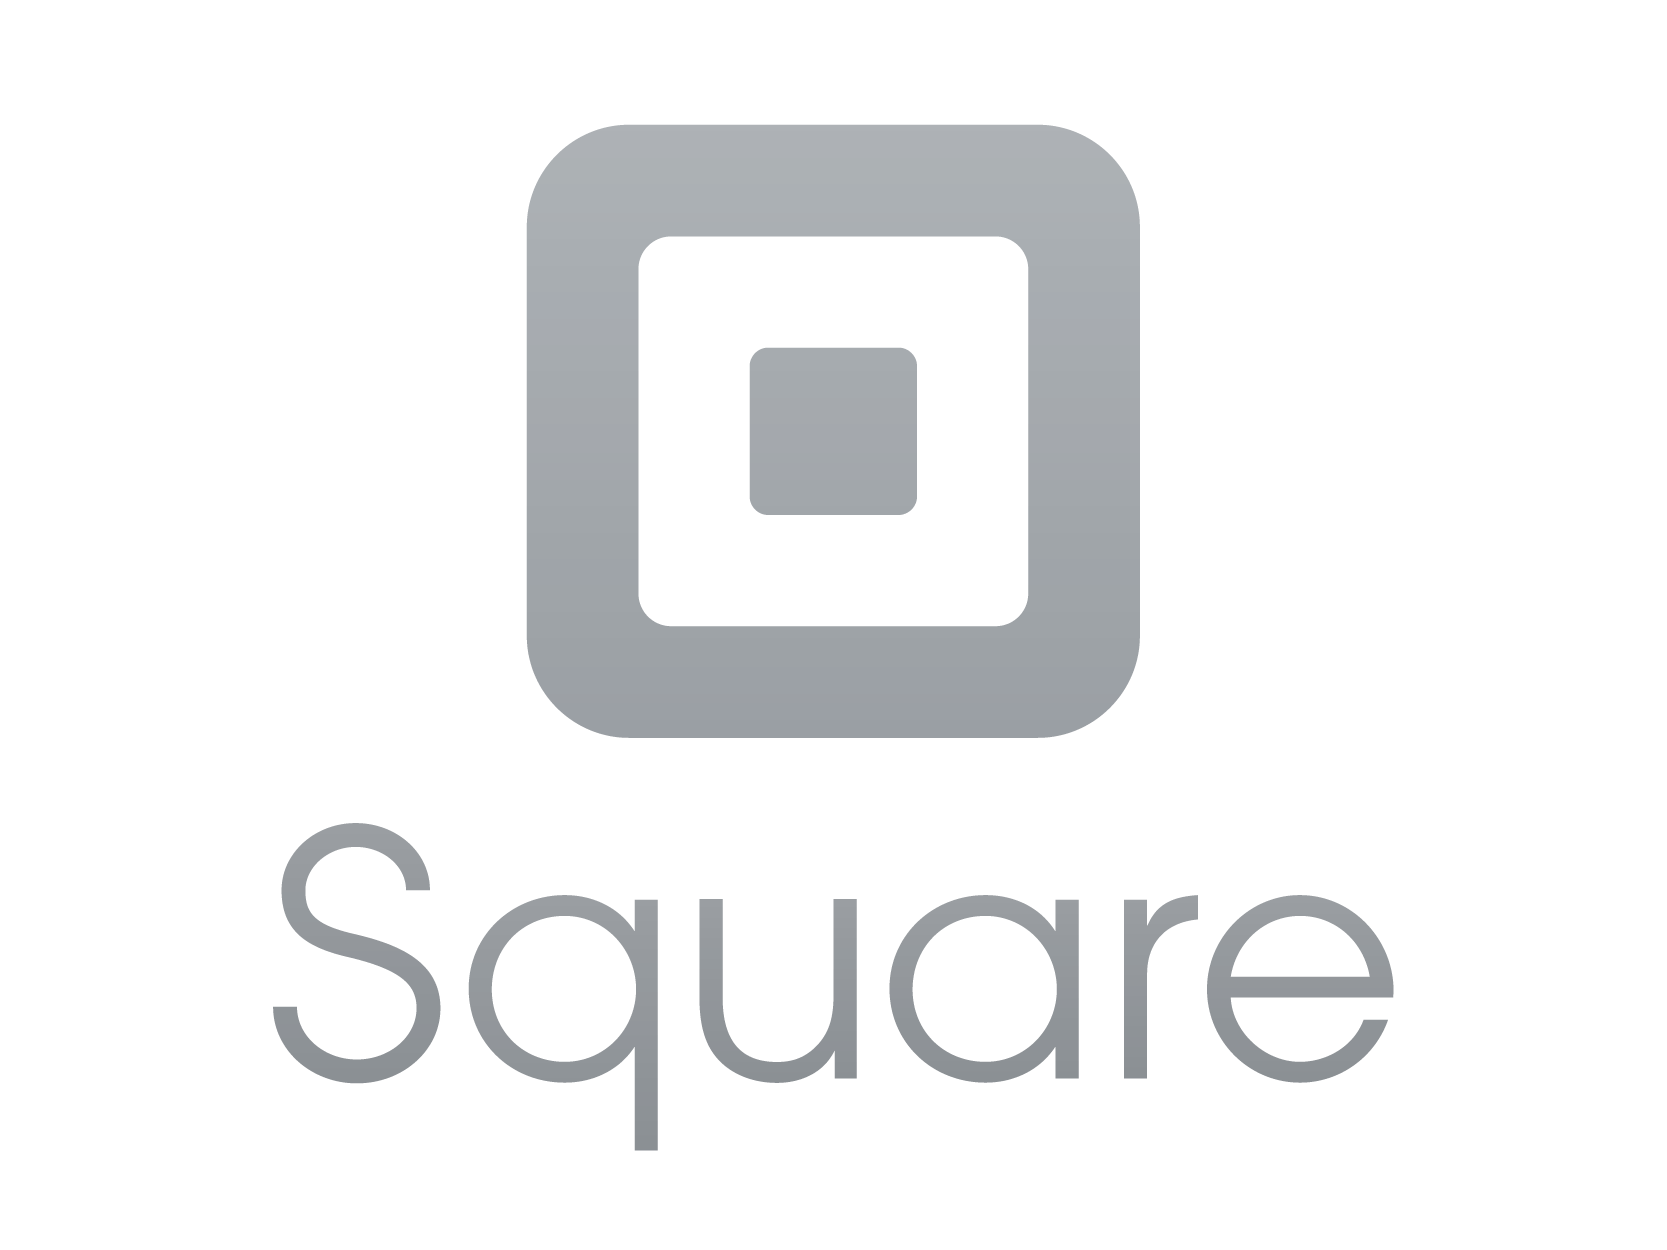 Pay with Square Logo - Square